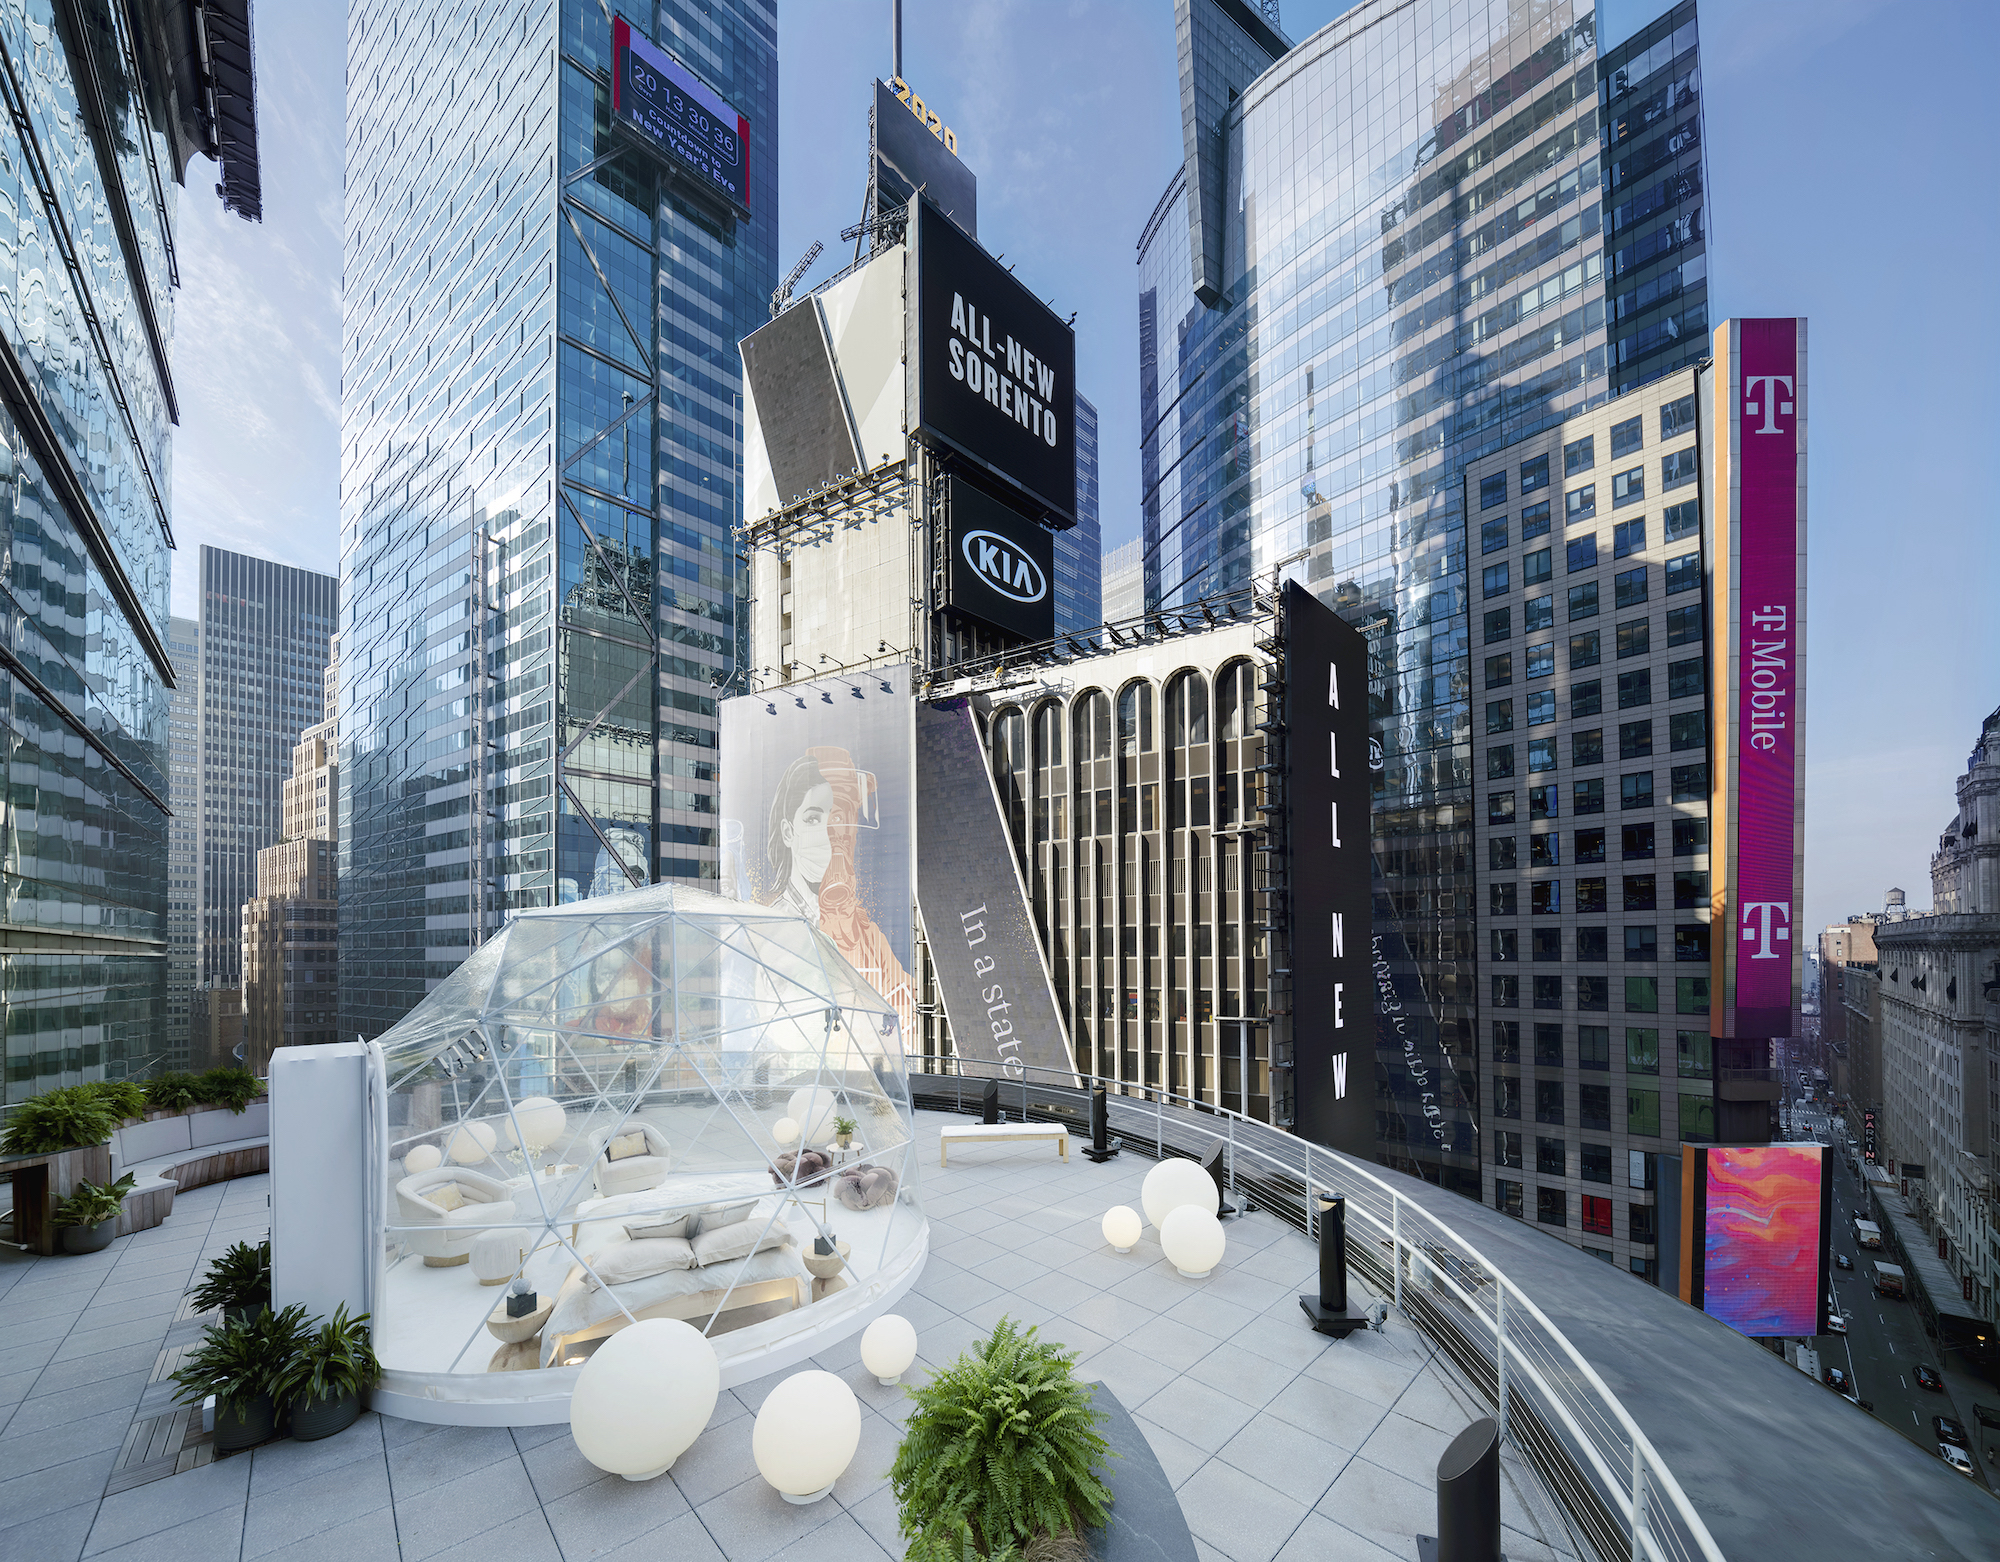 On New Year’s Eve, you can sleep in a private igloo under the Times Square Ball